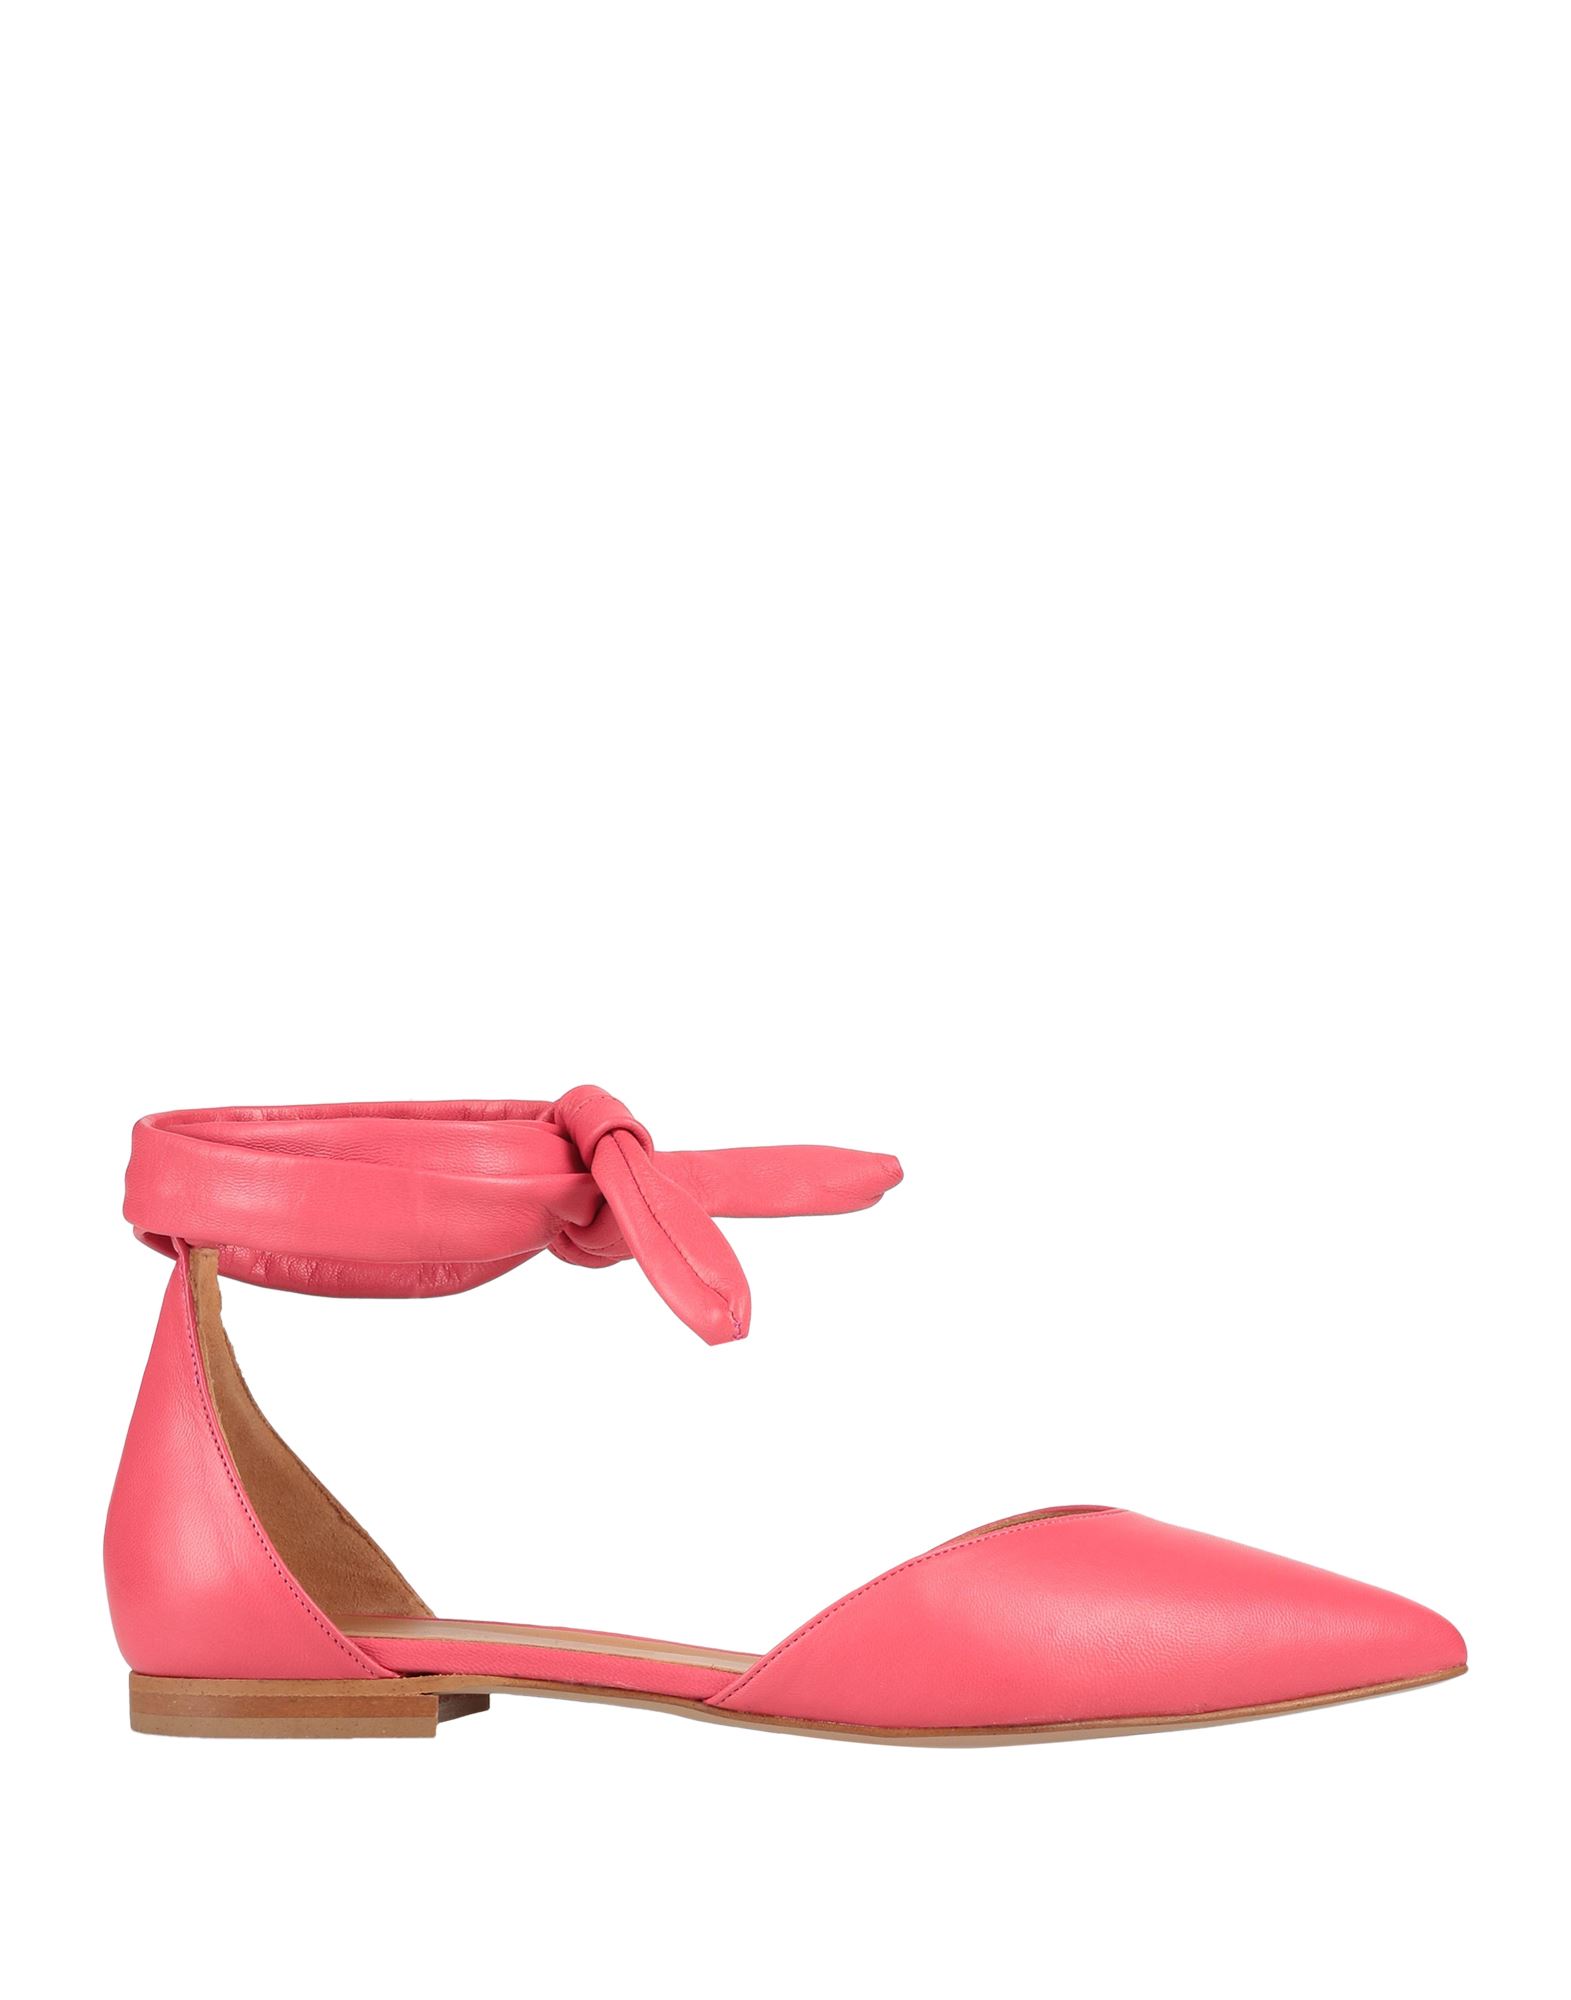 Les Tulipes Ballet Flats In Pink